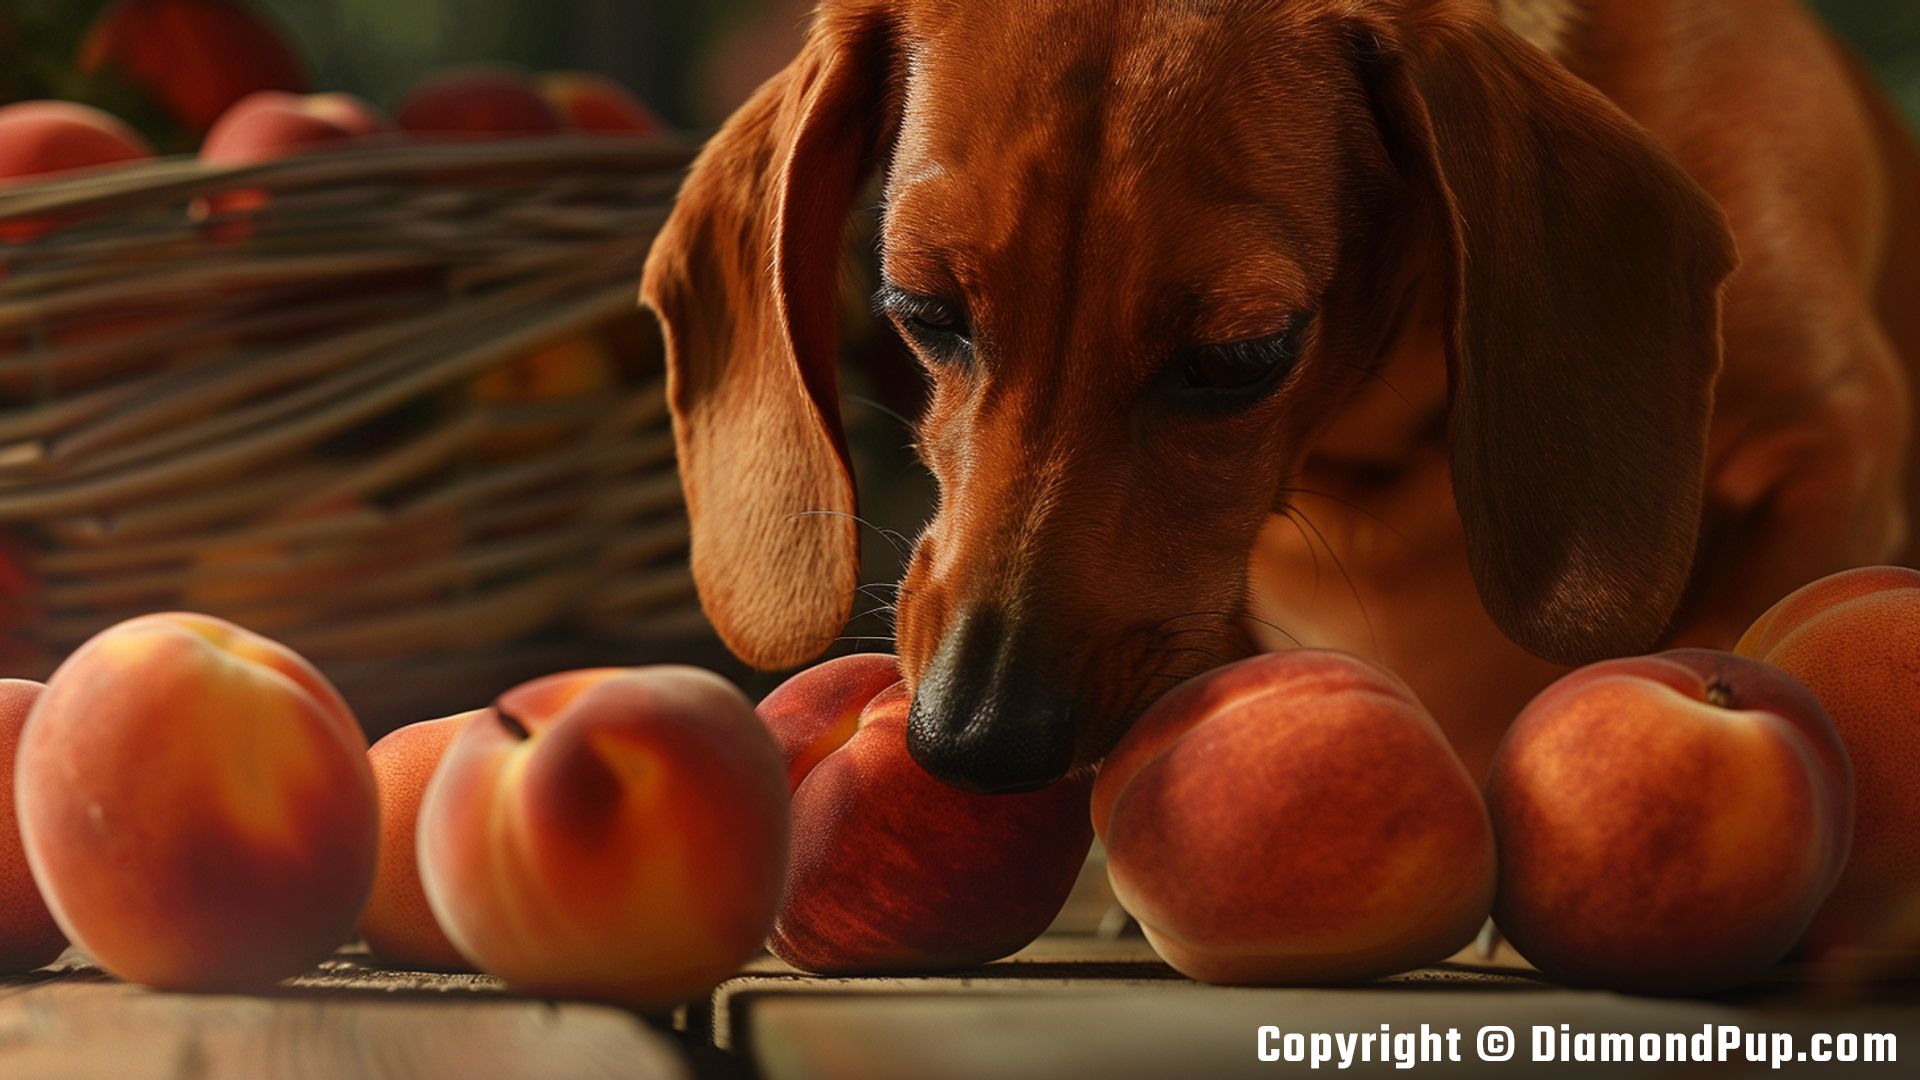 Photograph of a Happy Dachshund Eating Peaches